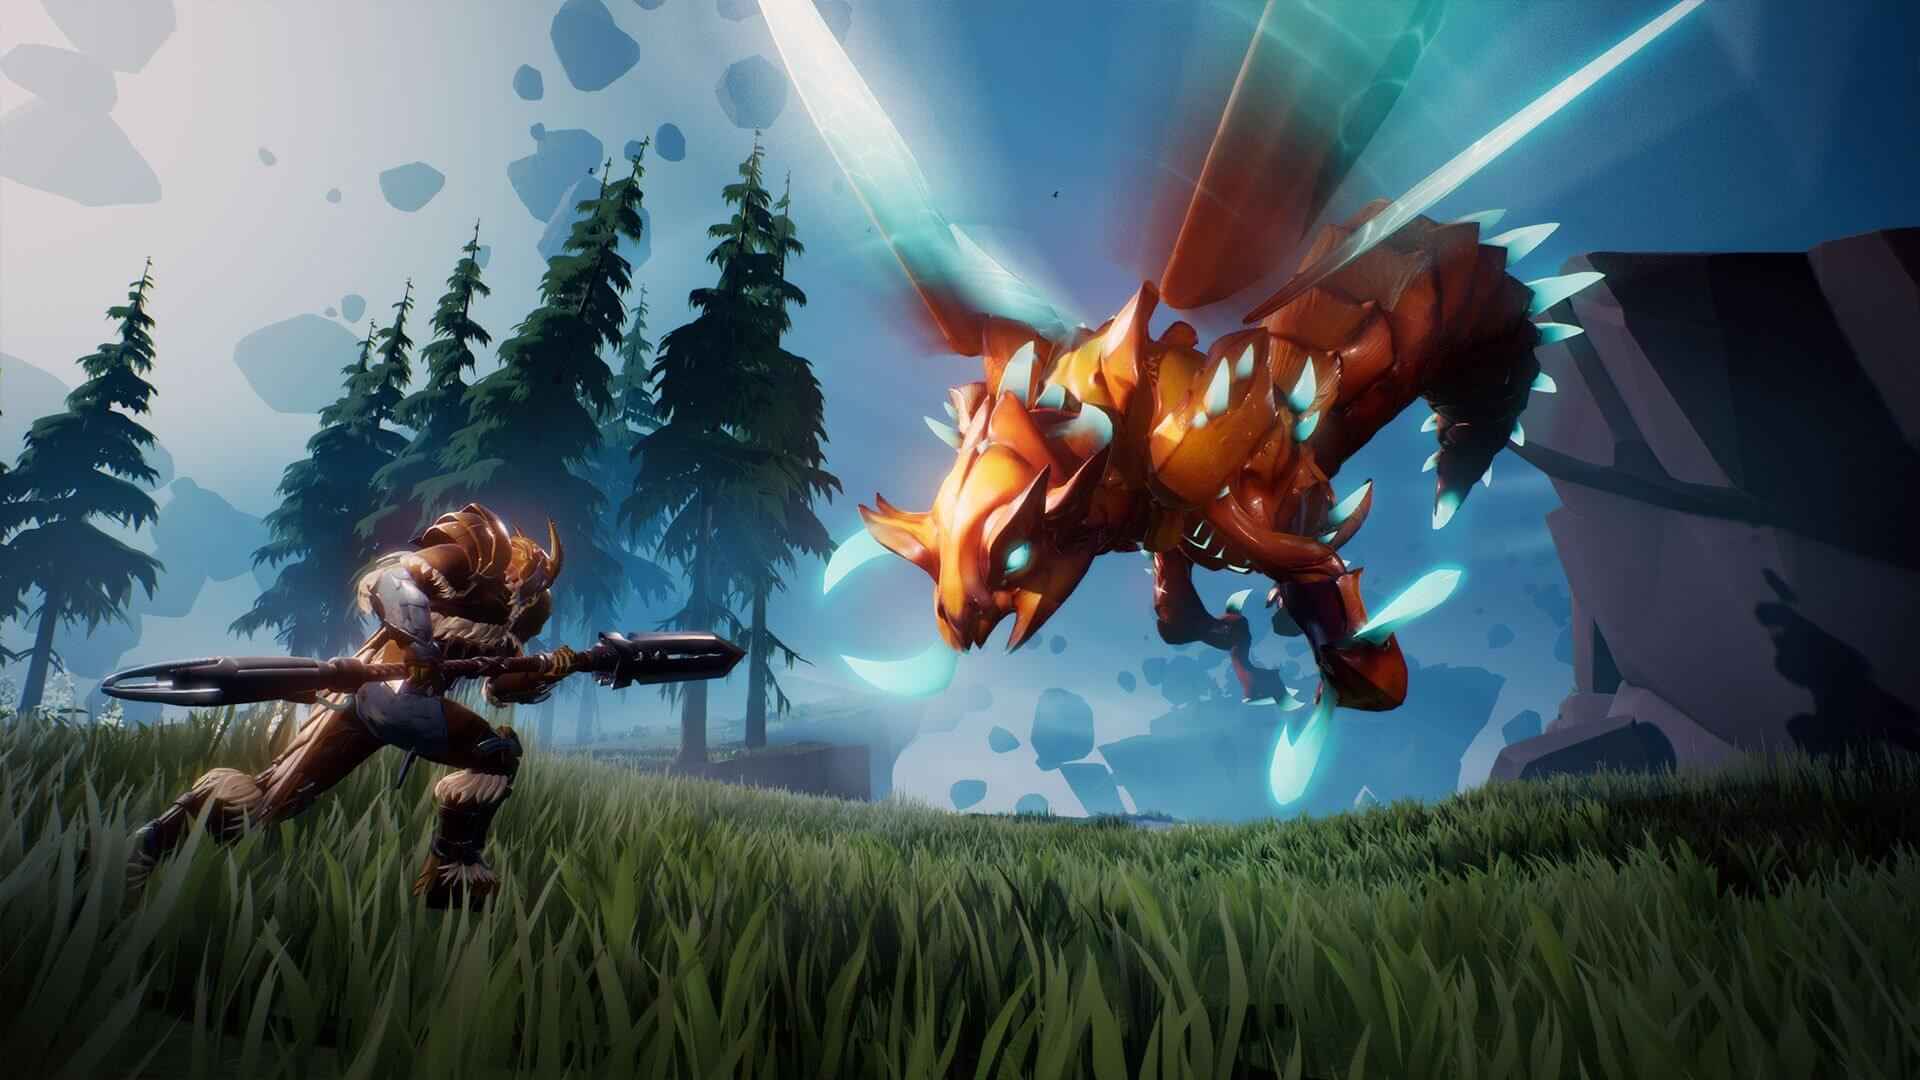 Dauntless Update 1.2.0b Now Available, Fulle Patch Notes Here